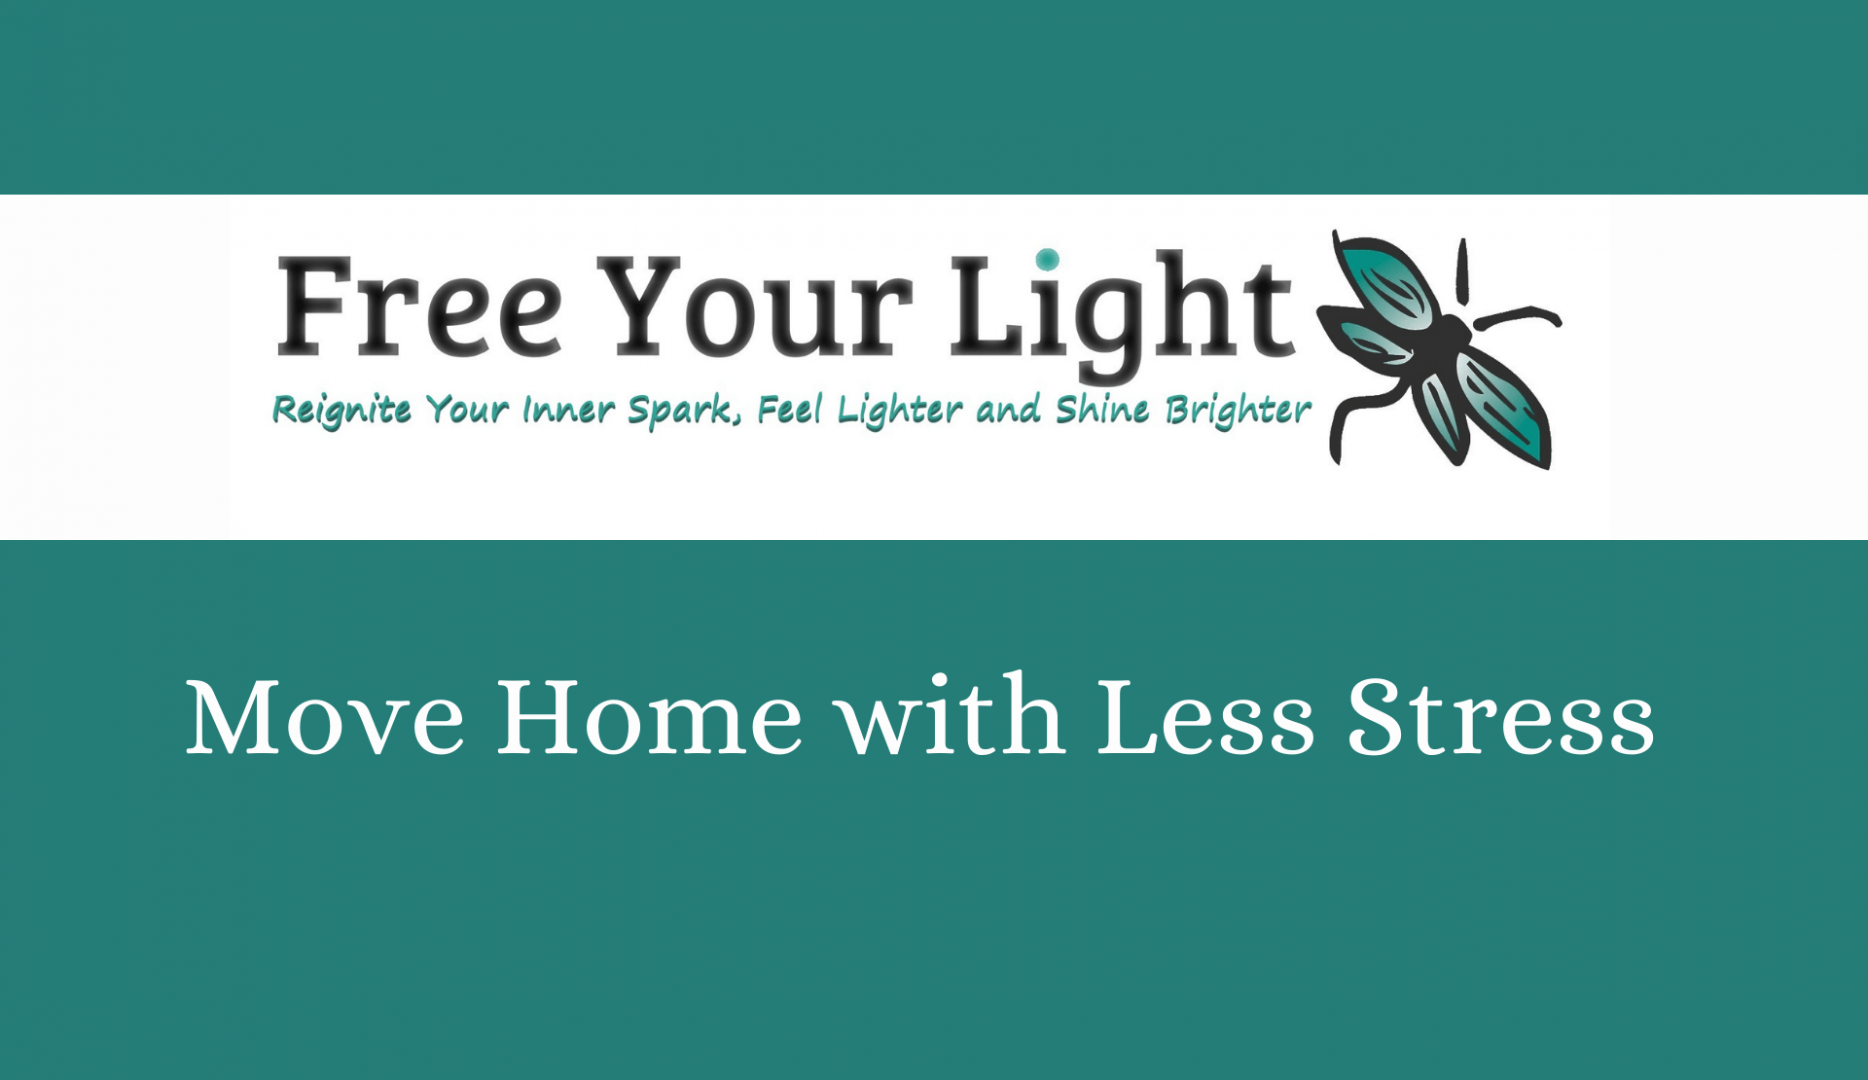 Free Your Light in Gloucester